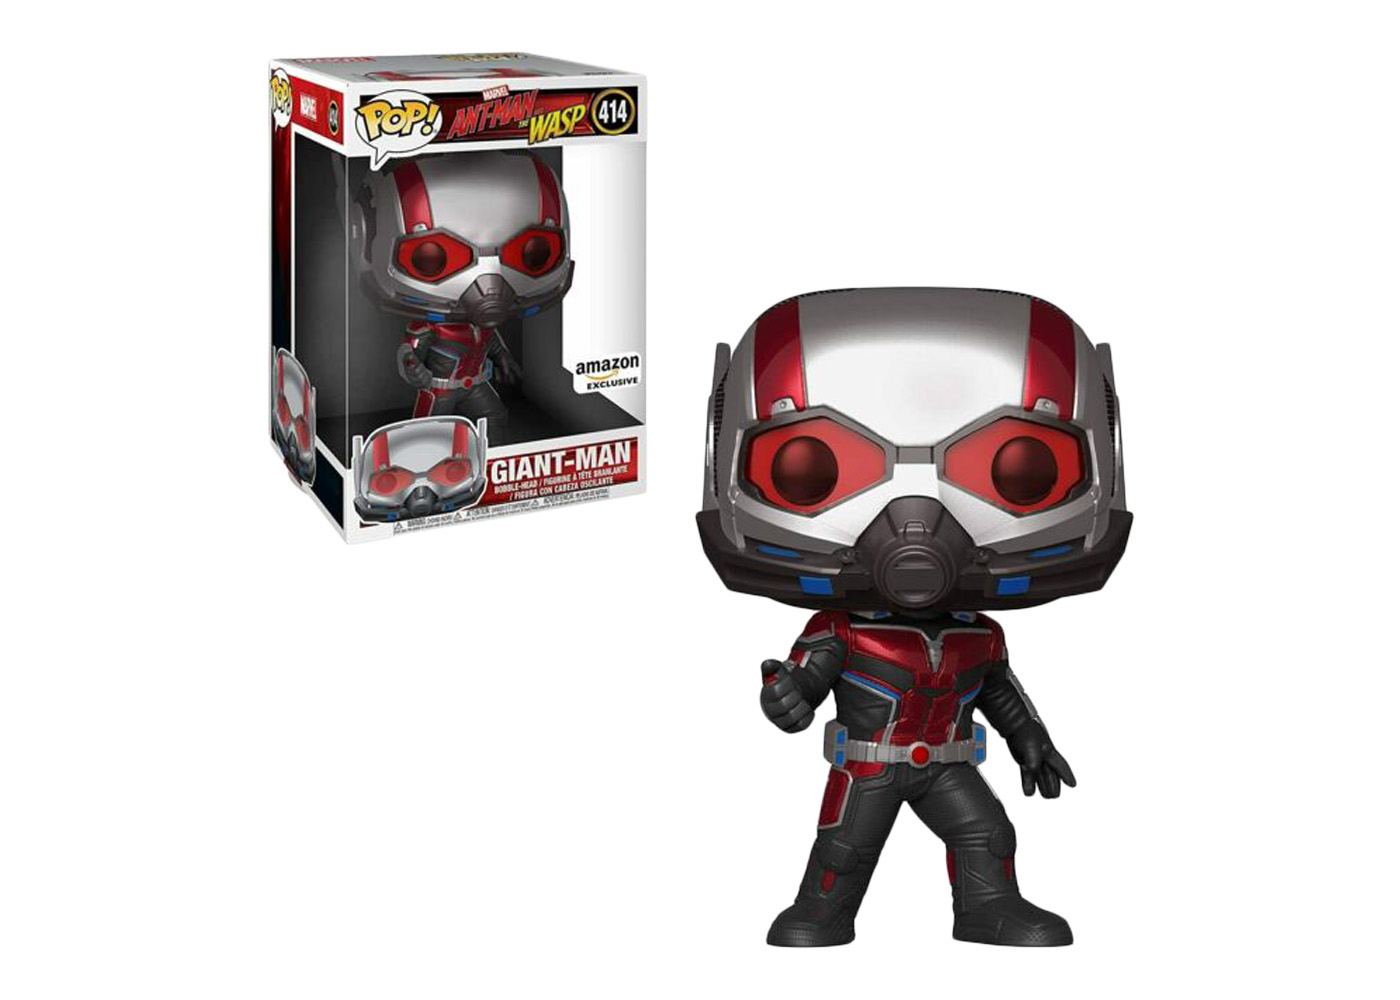 Funko Pop! Marvel Ant-Man and the Wasp Giant-Man Amazon Exclusive 10 Inch  Figure #414